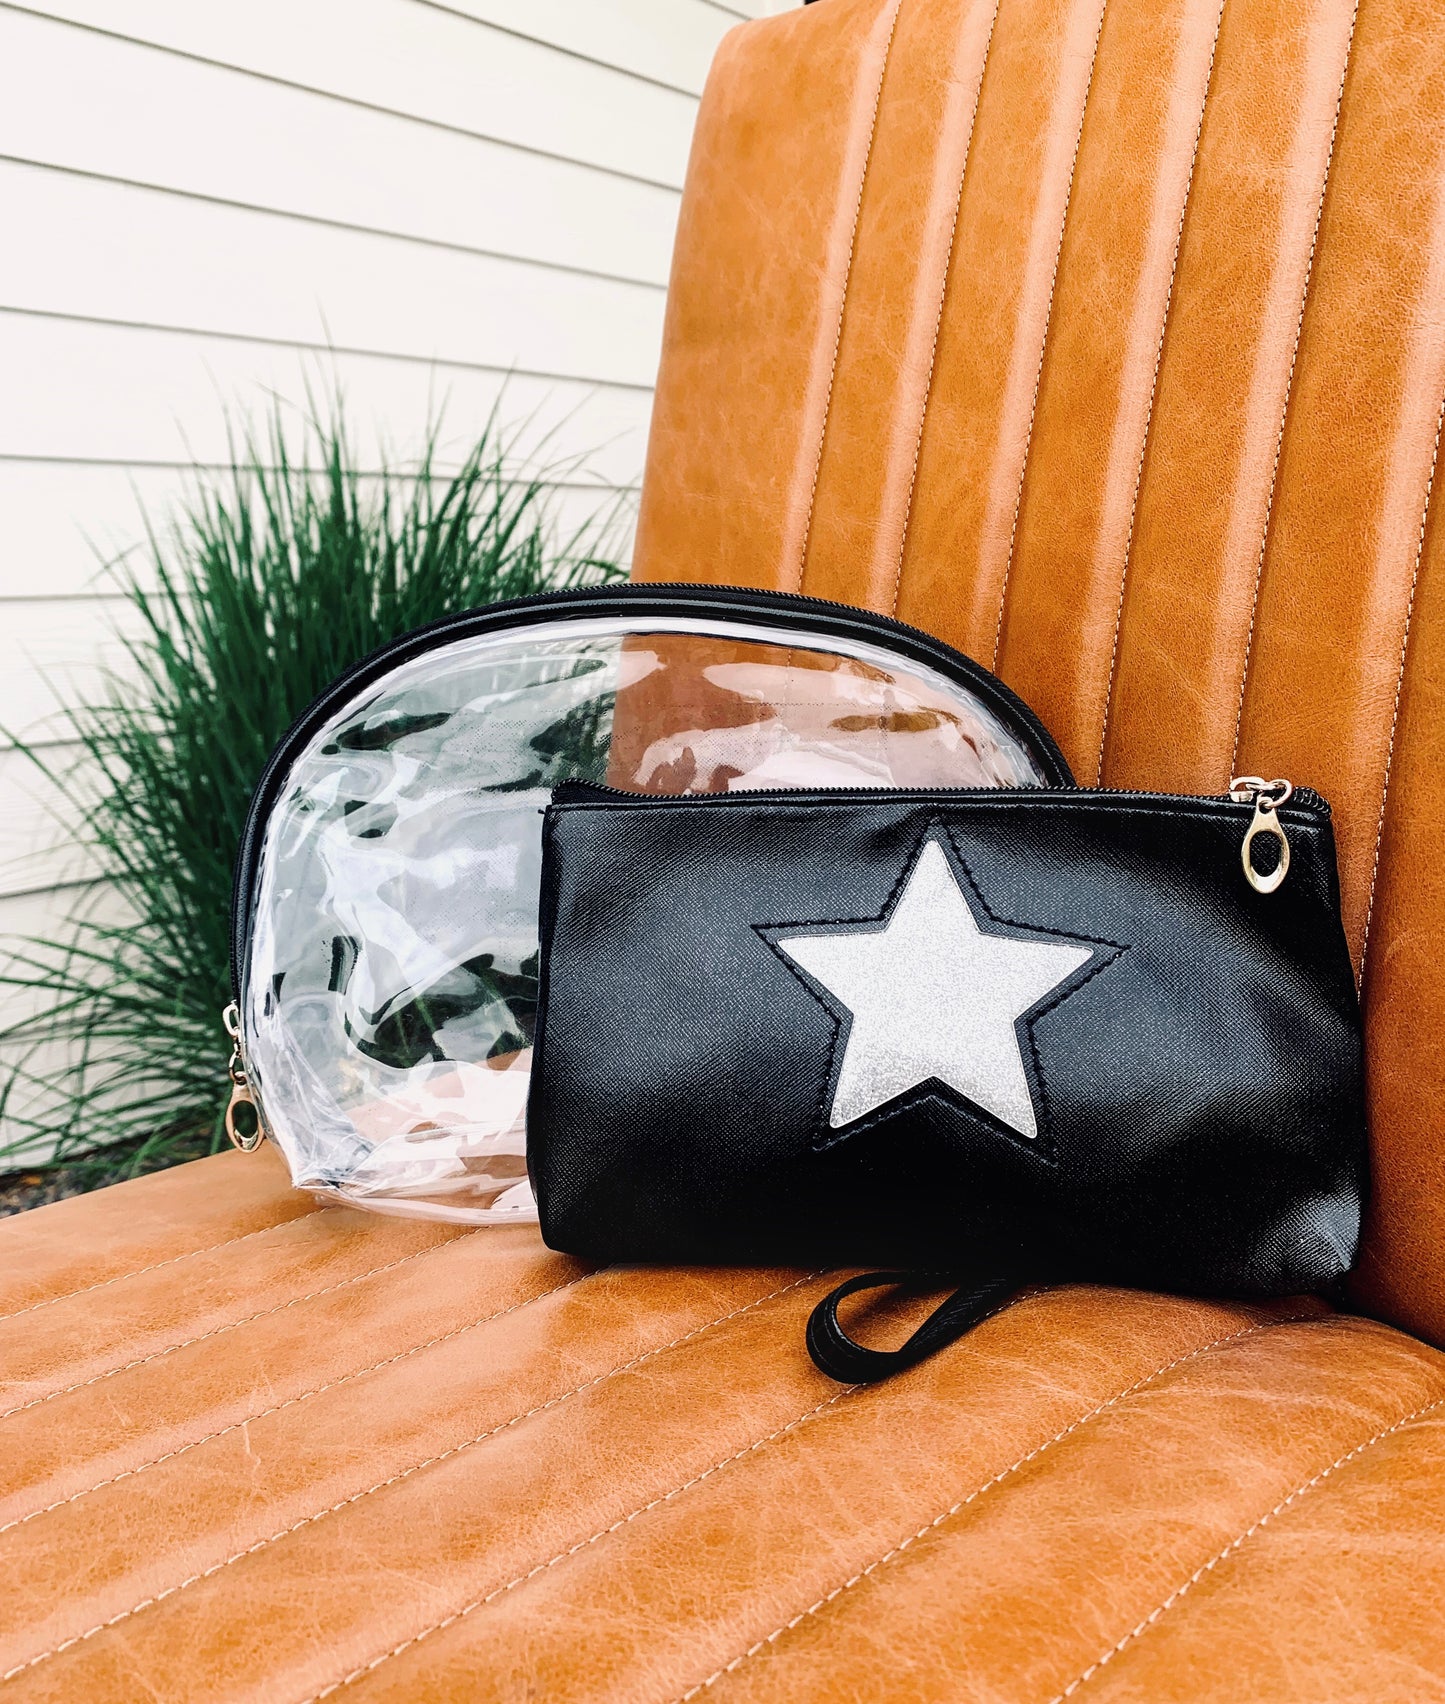 Star Toiletry Bags (2 piece set)